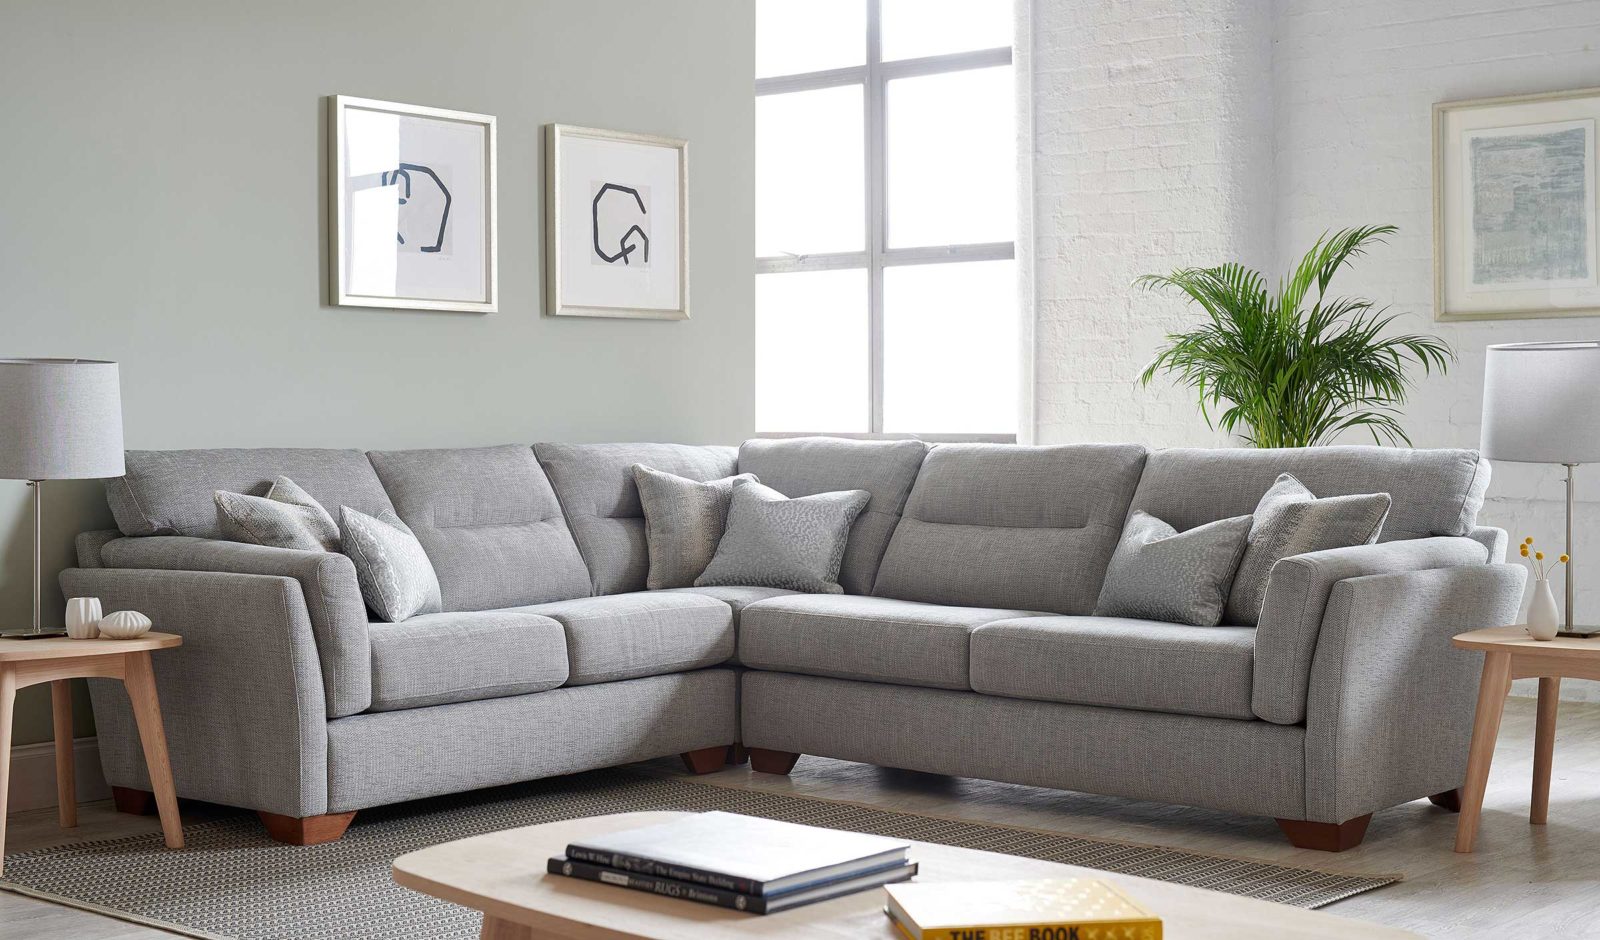 Do Not Compromise - The Comfortable Sofa Bed Is Out There